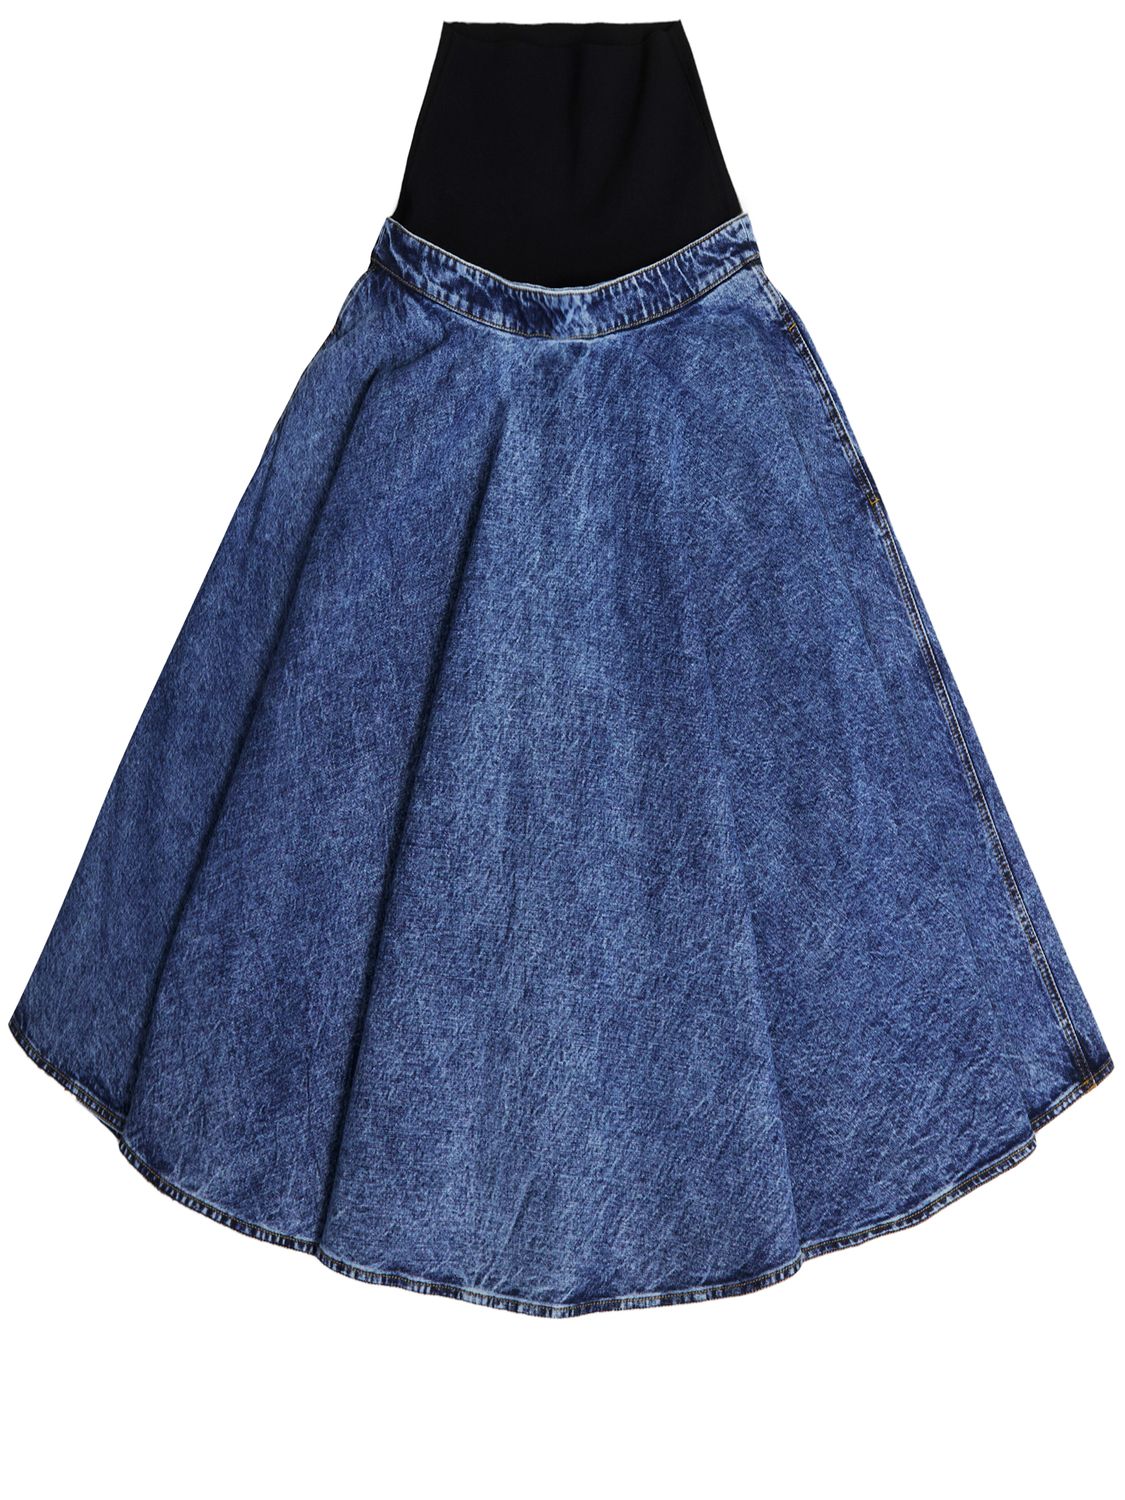 ALAIA SKIRT WITH KNIT BAND